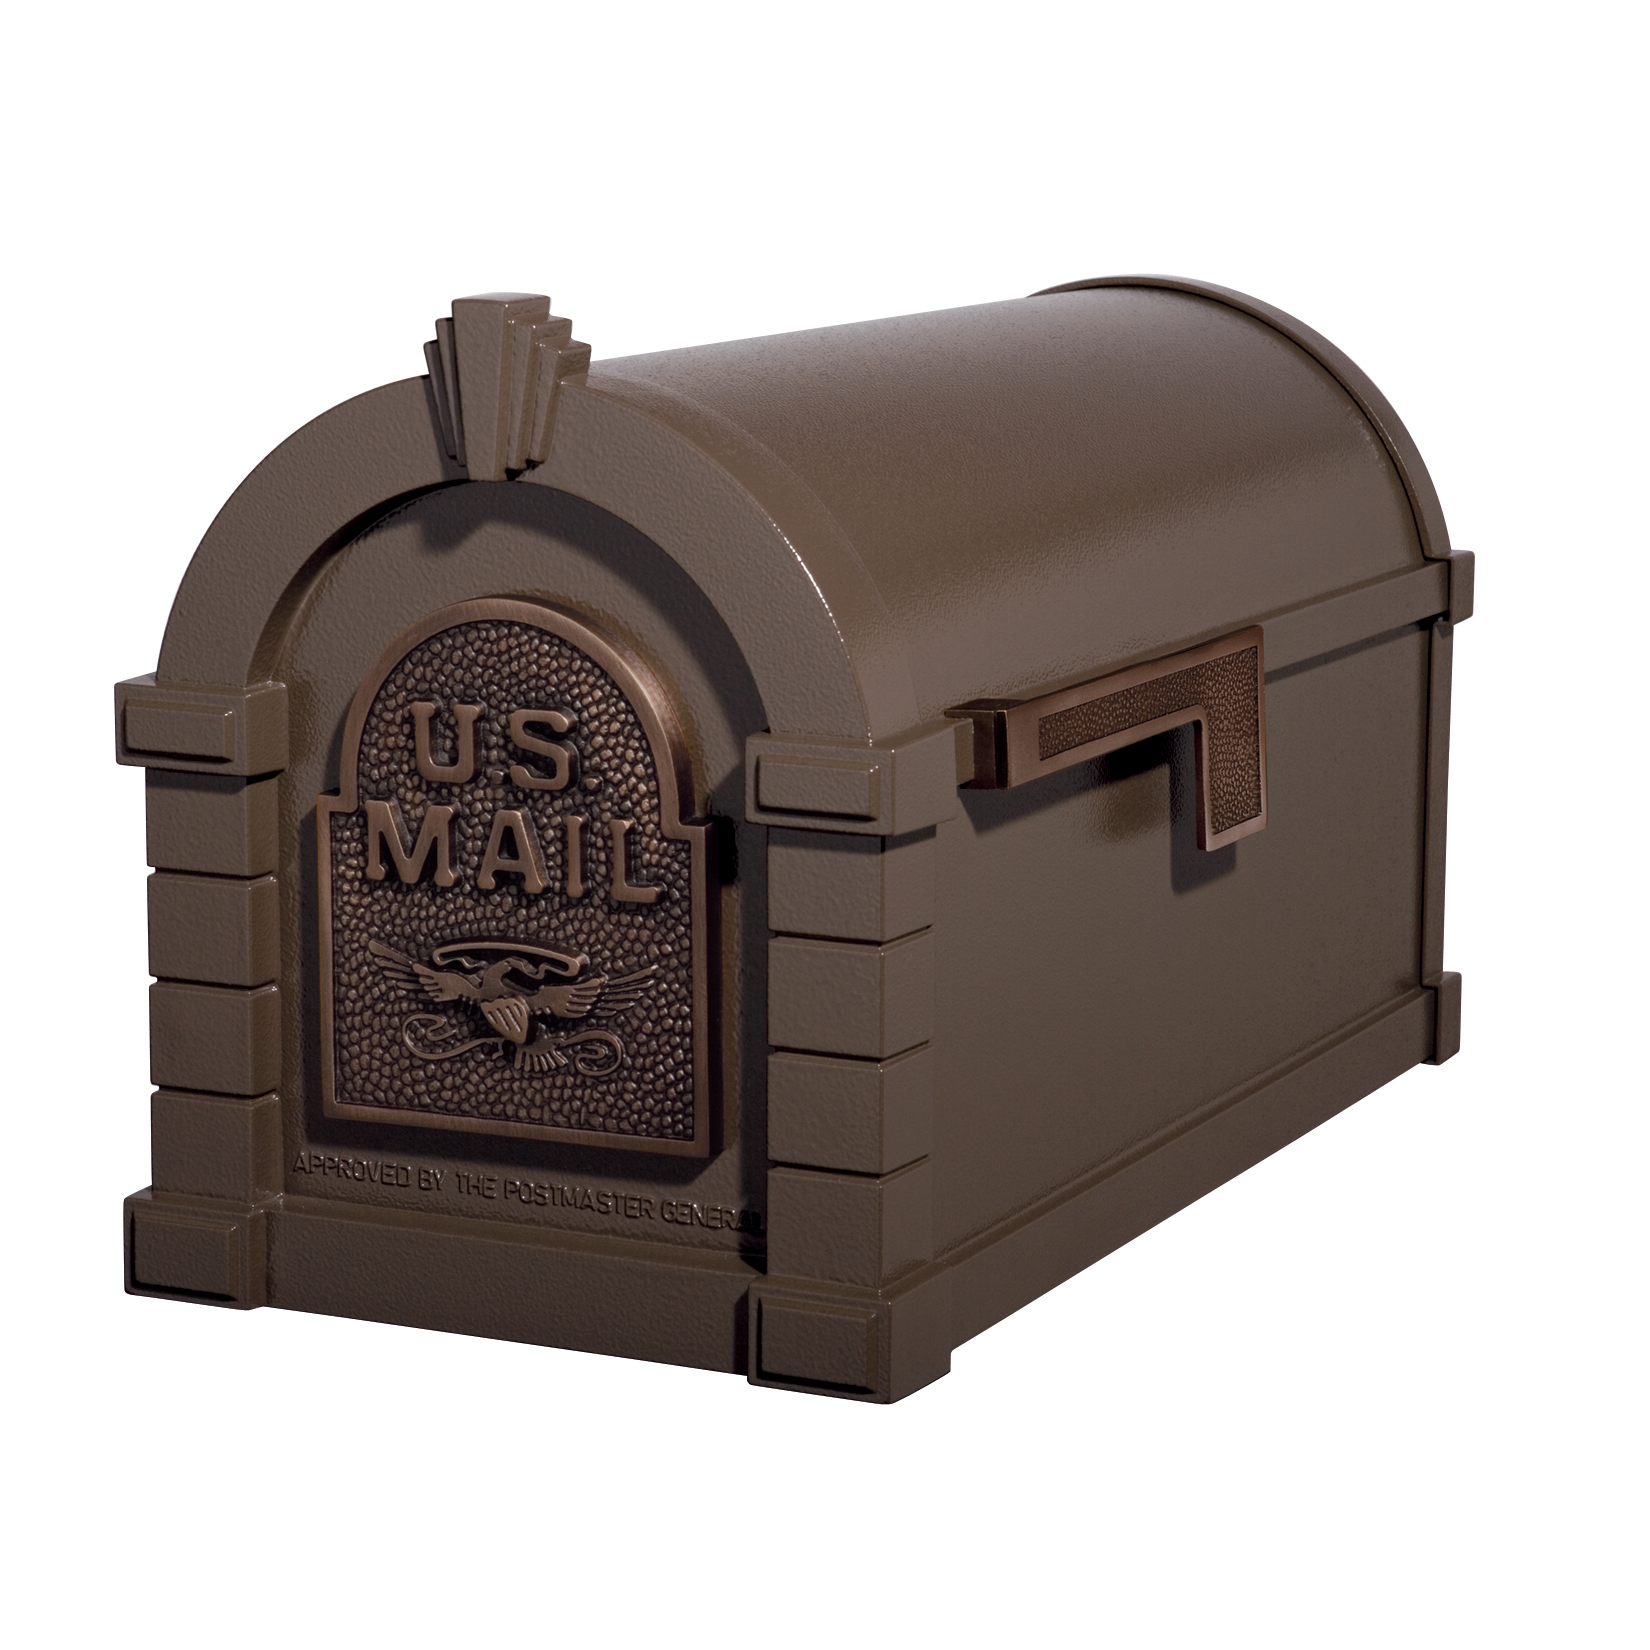 Gaines Eagle Keystone Mailboxes - Bronze with Antique Bronze